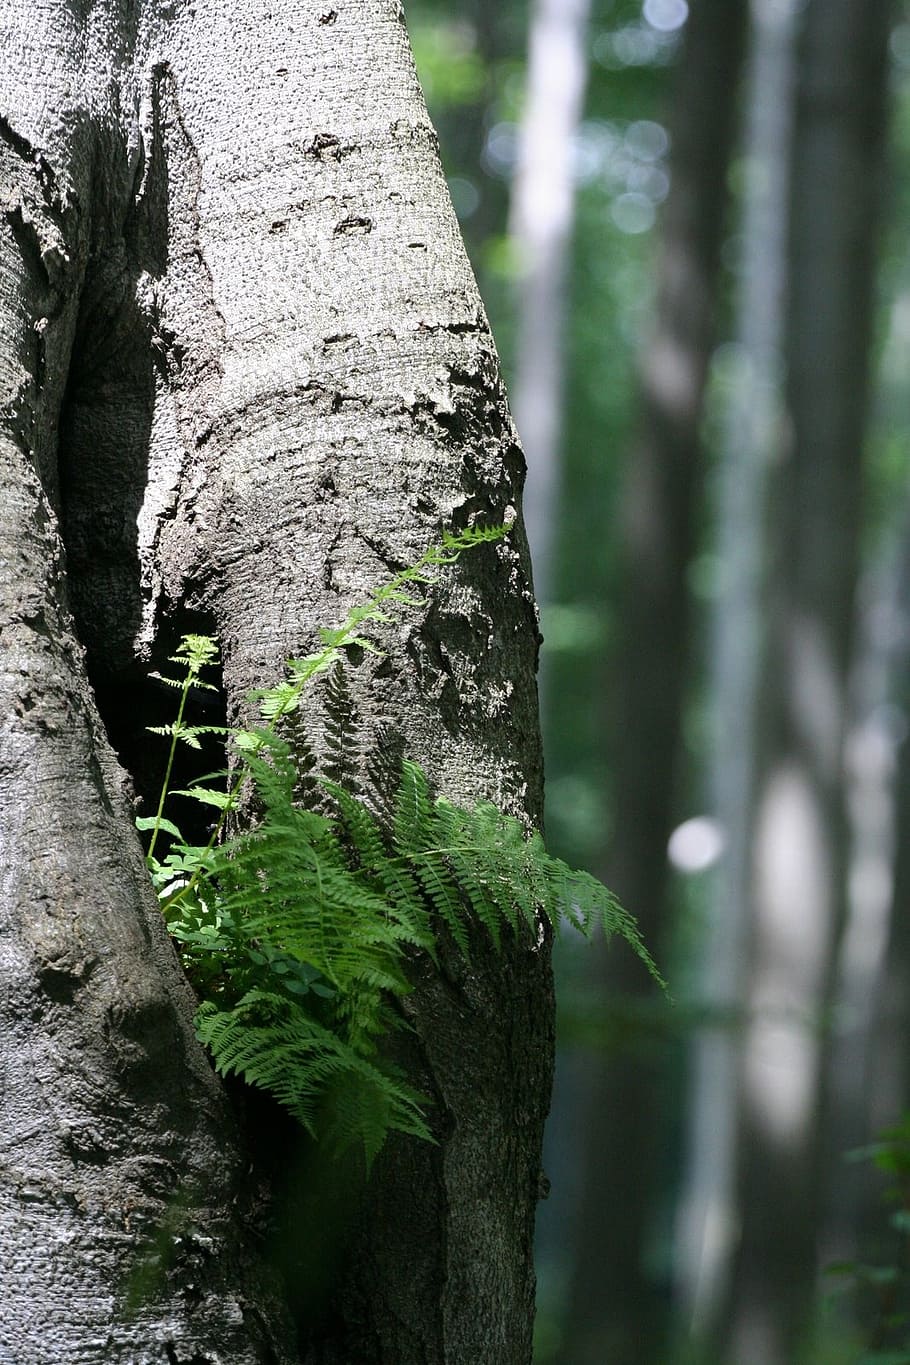 fern, wood, green, plant, nature, leaves, plants, leaf plants, photosynthesis, tree